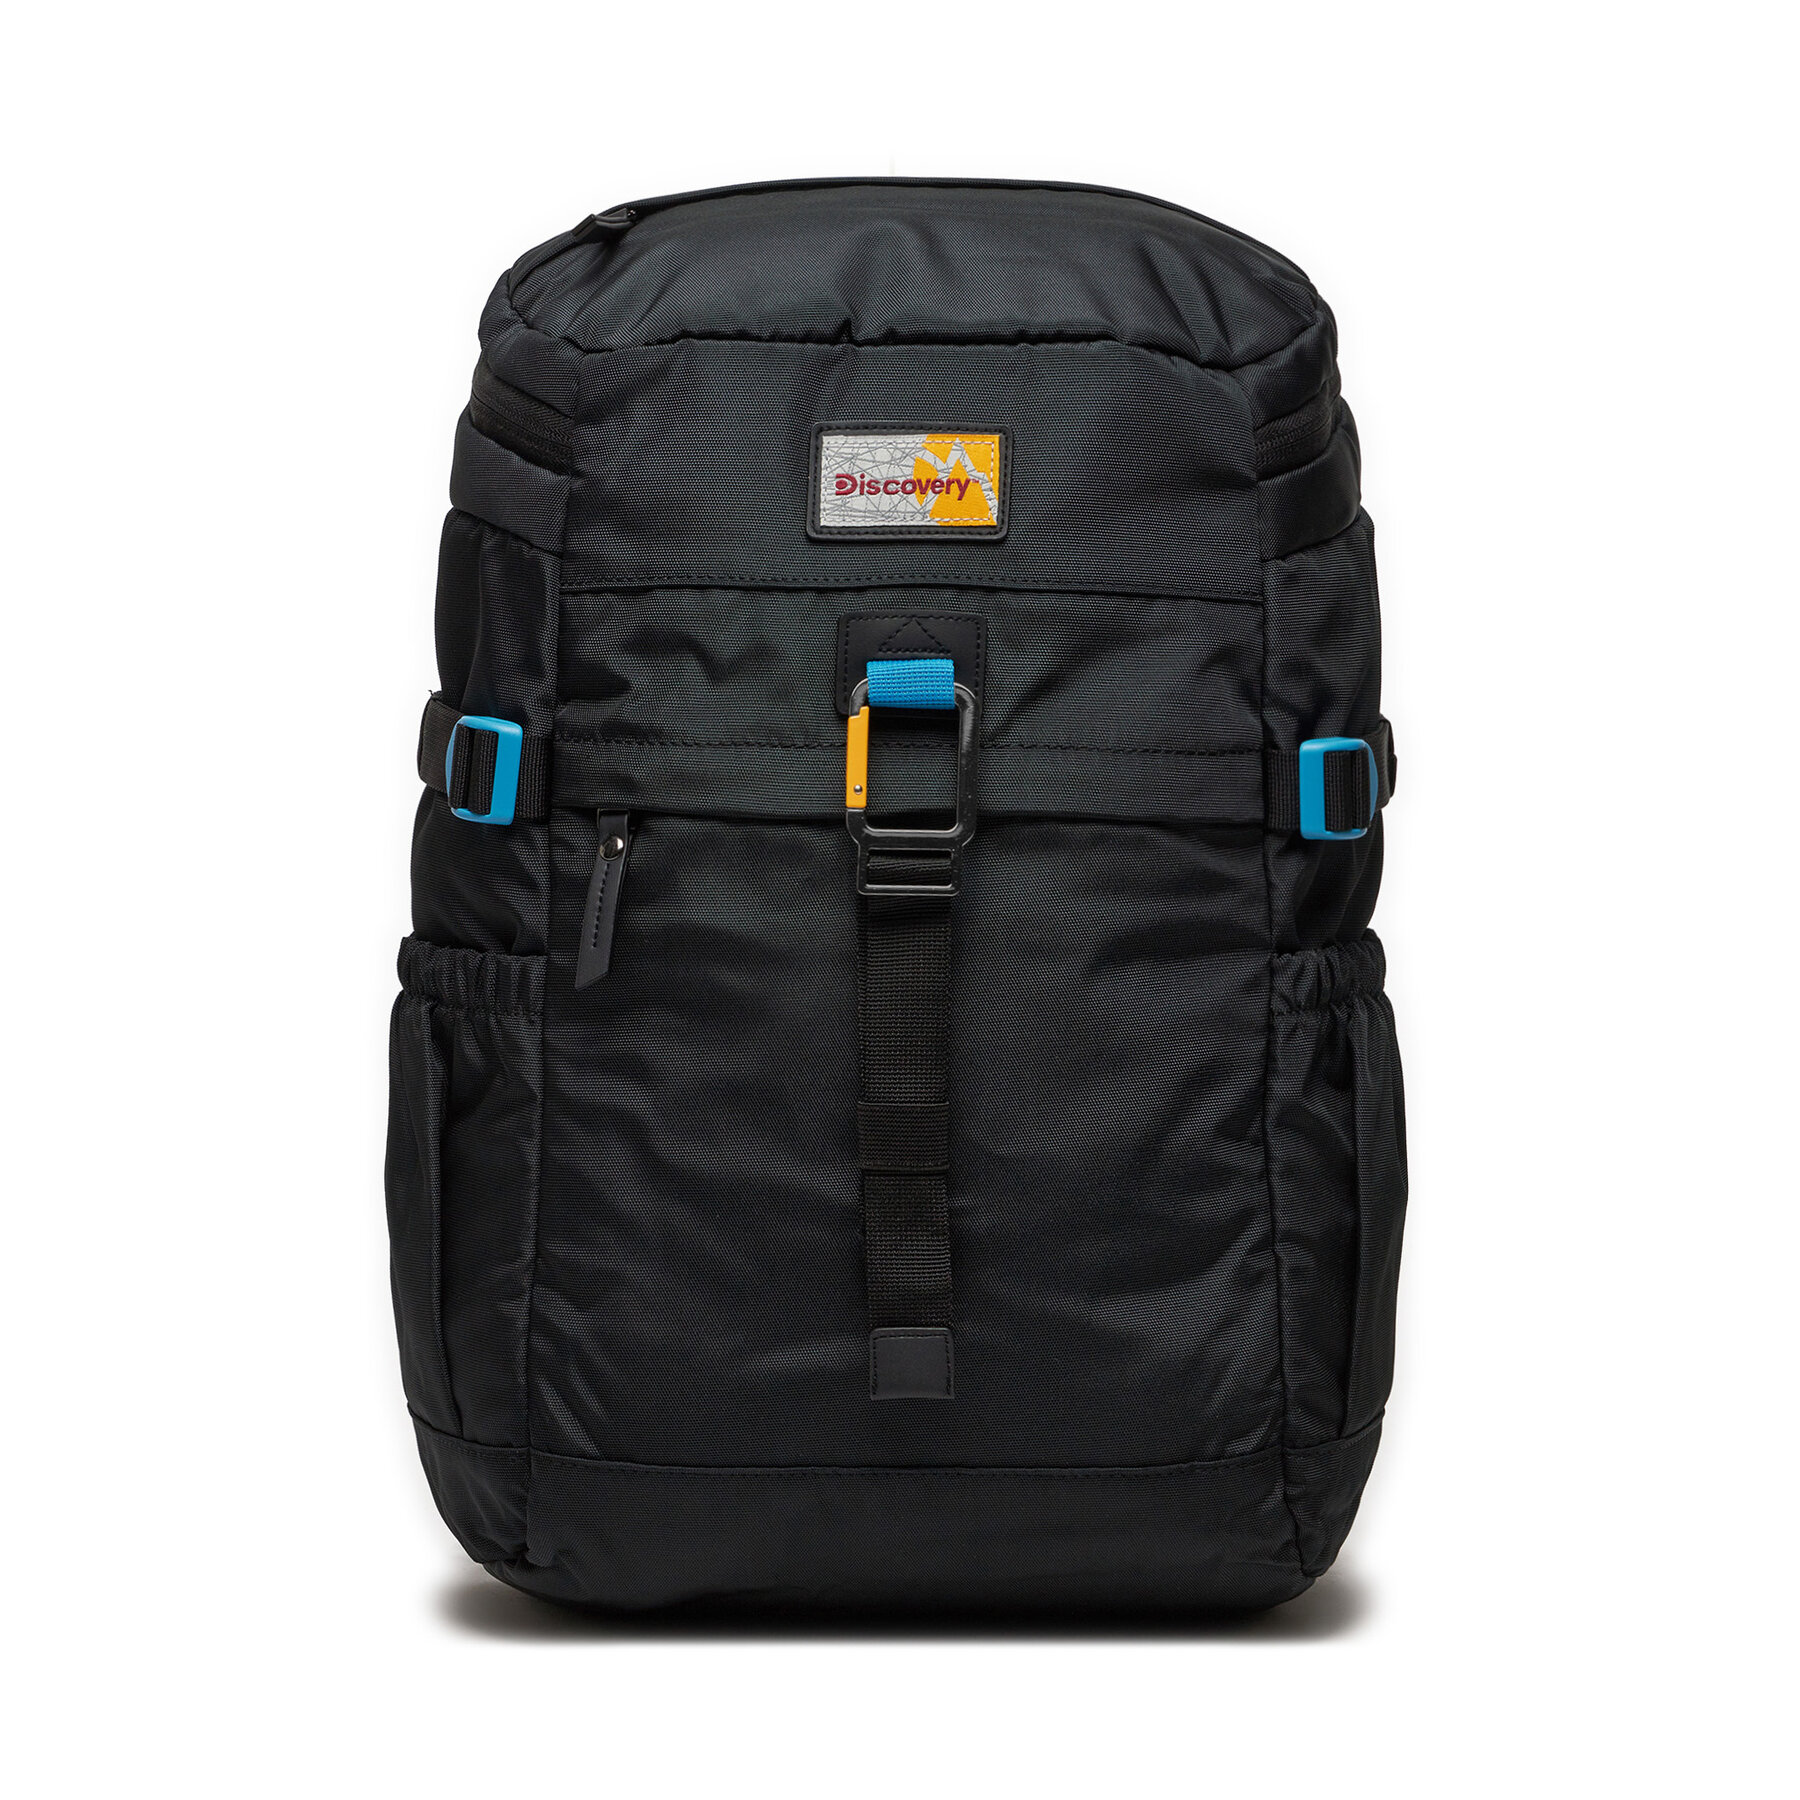 Rucksack Discovery Computer Backpack D00723.06 Schwarz von Discovery